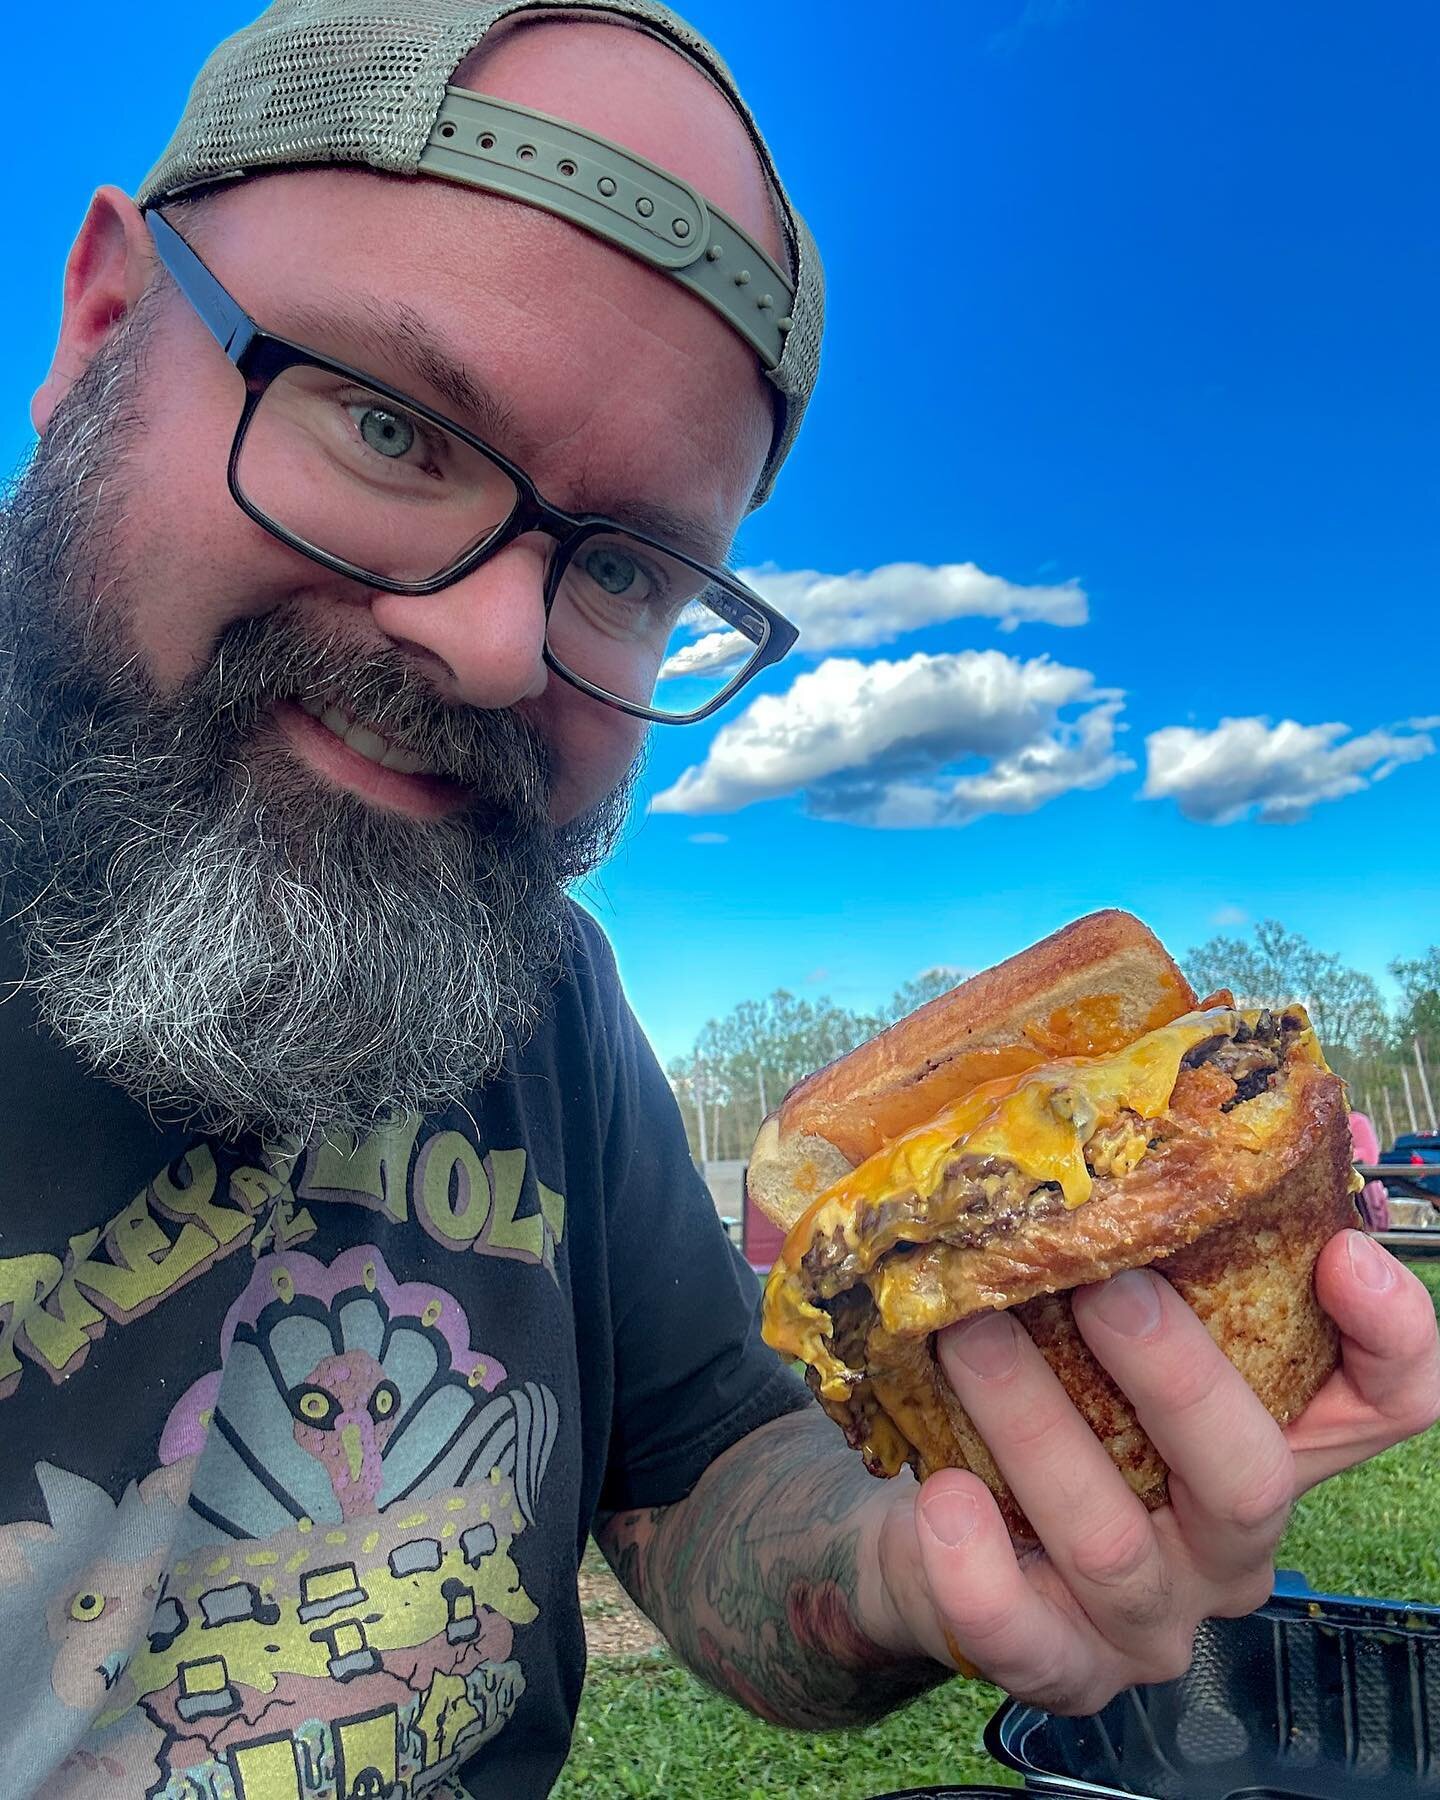 🚨BURGER 🍔 GIVEAWAY🚨 We’re giving away (5) burgers of choice this weekend at our BEER & BURGER FEST at @mobtownbrewing To ENTER: send us a pic of your best moment at @fuzziesburgers & tag your besties How to Win: we wanna see your